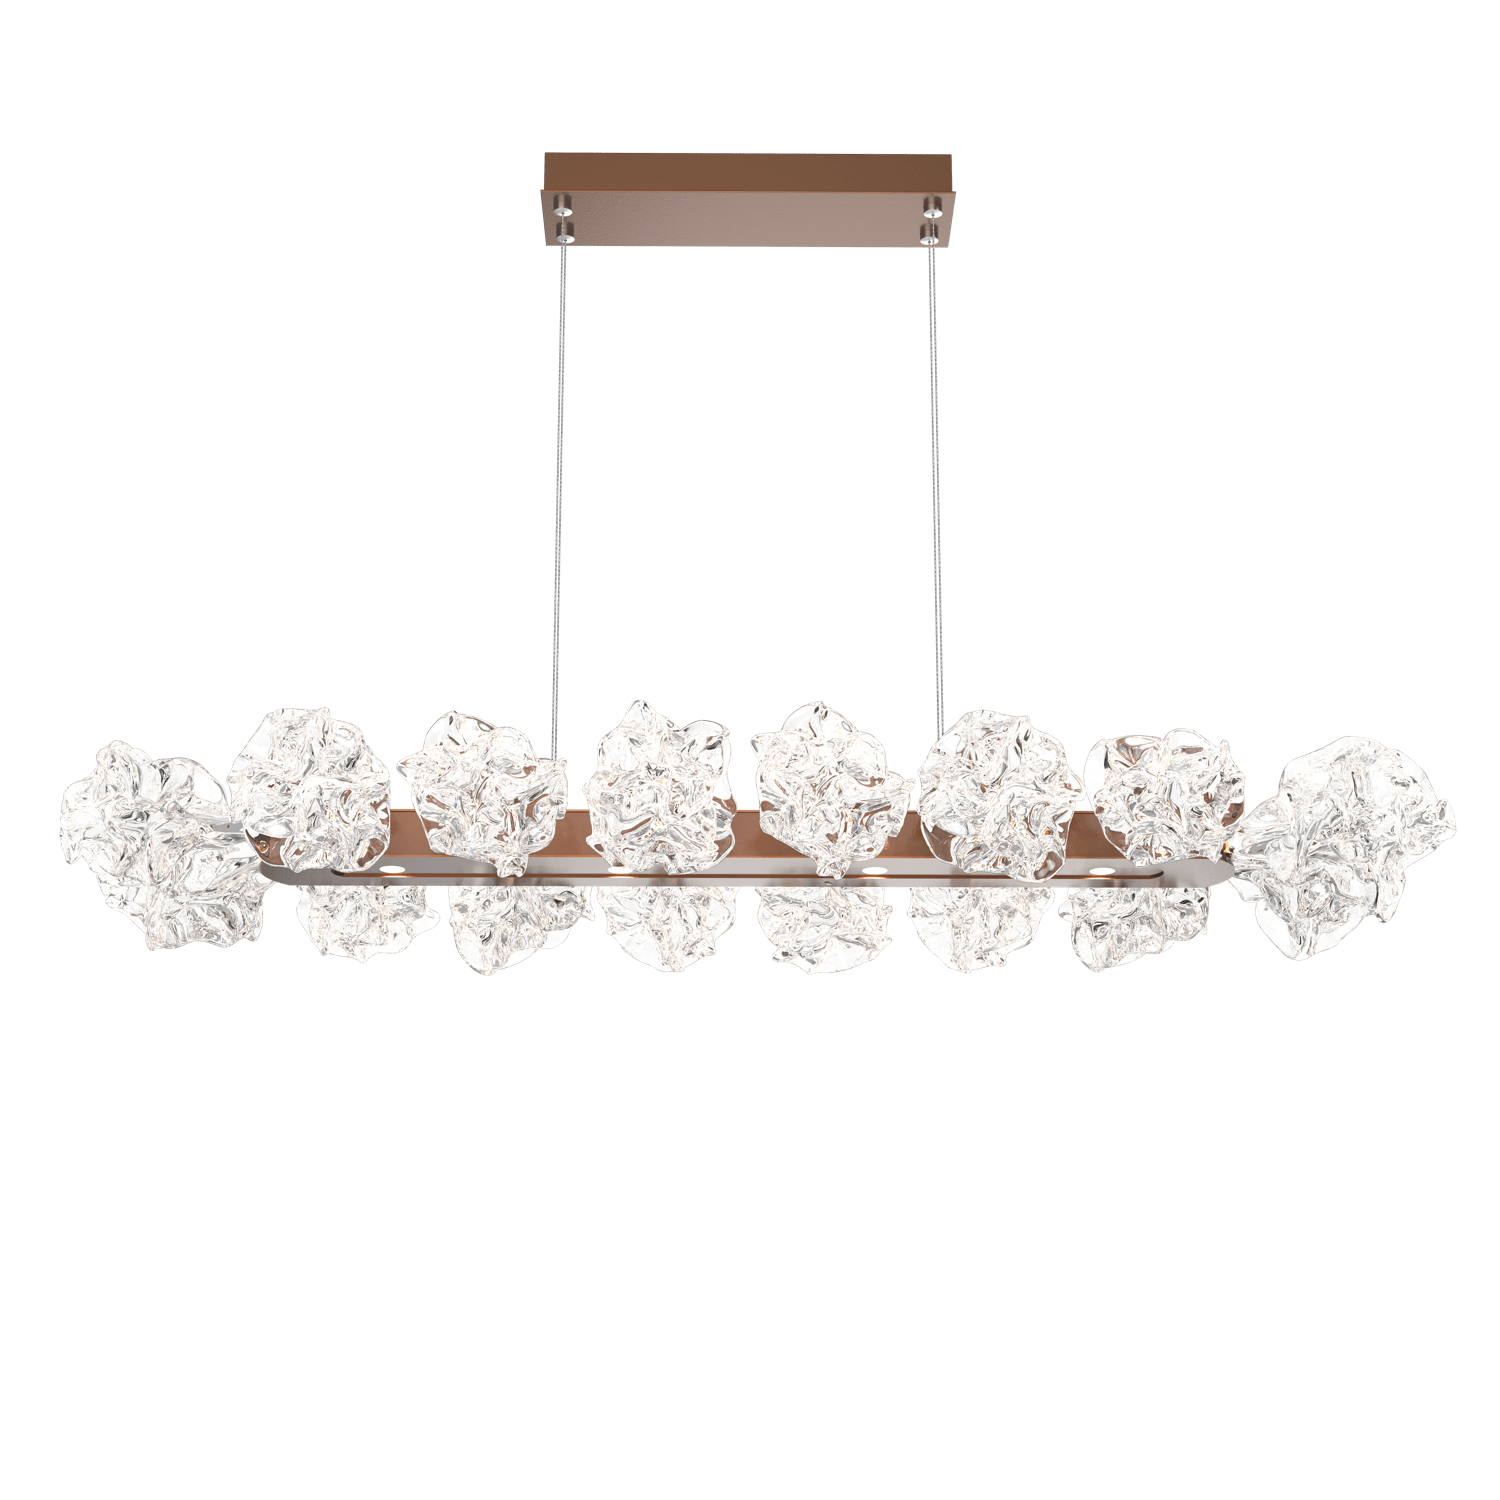 PLB0059-48-BB-Hammerton-Studio-Blossom-48-inch-linear-chandelier-with-burnished-bronze-finish-and-clear-handblown-crystal-glass-shades-and-LED-lamping